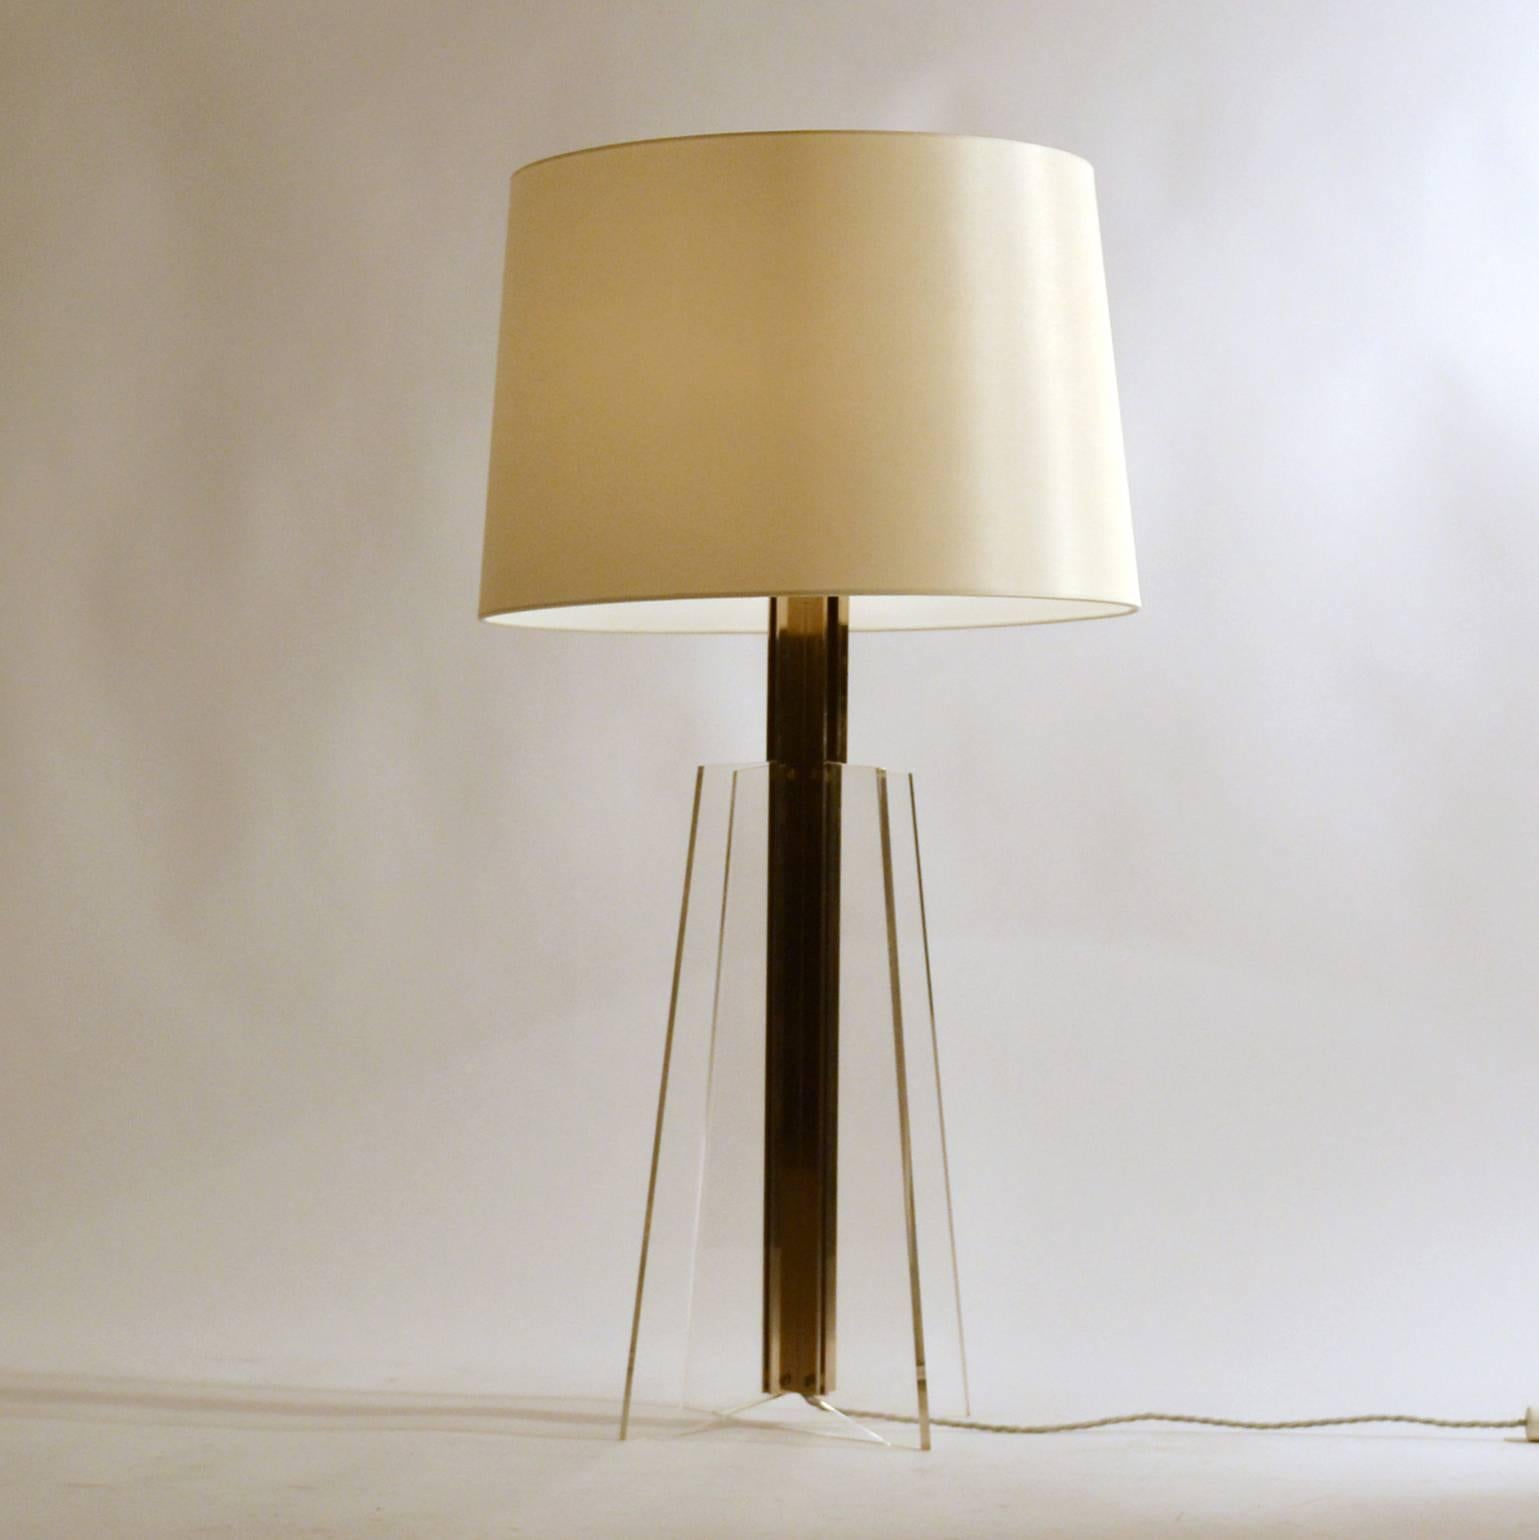 Large pair of Kaiser table lamps have a center pillar in chrome from which perspex sheets are connected in four directions. The cream silk shades are new.